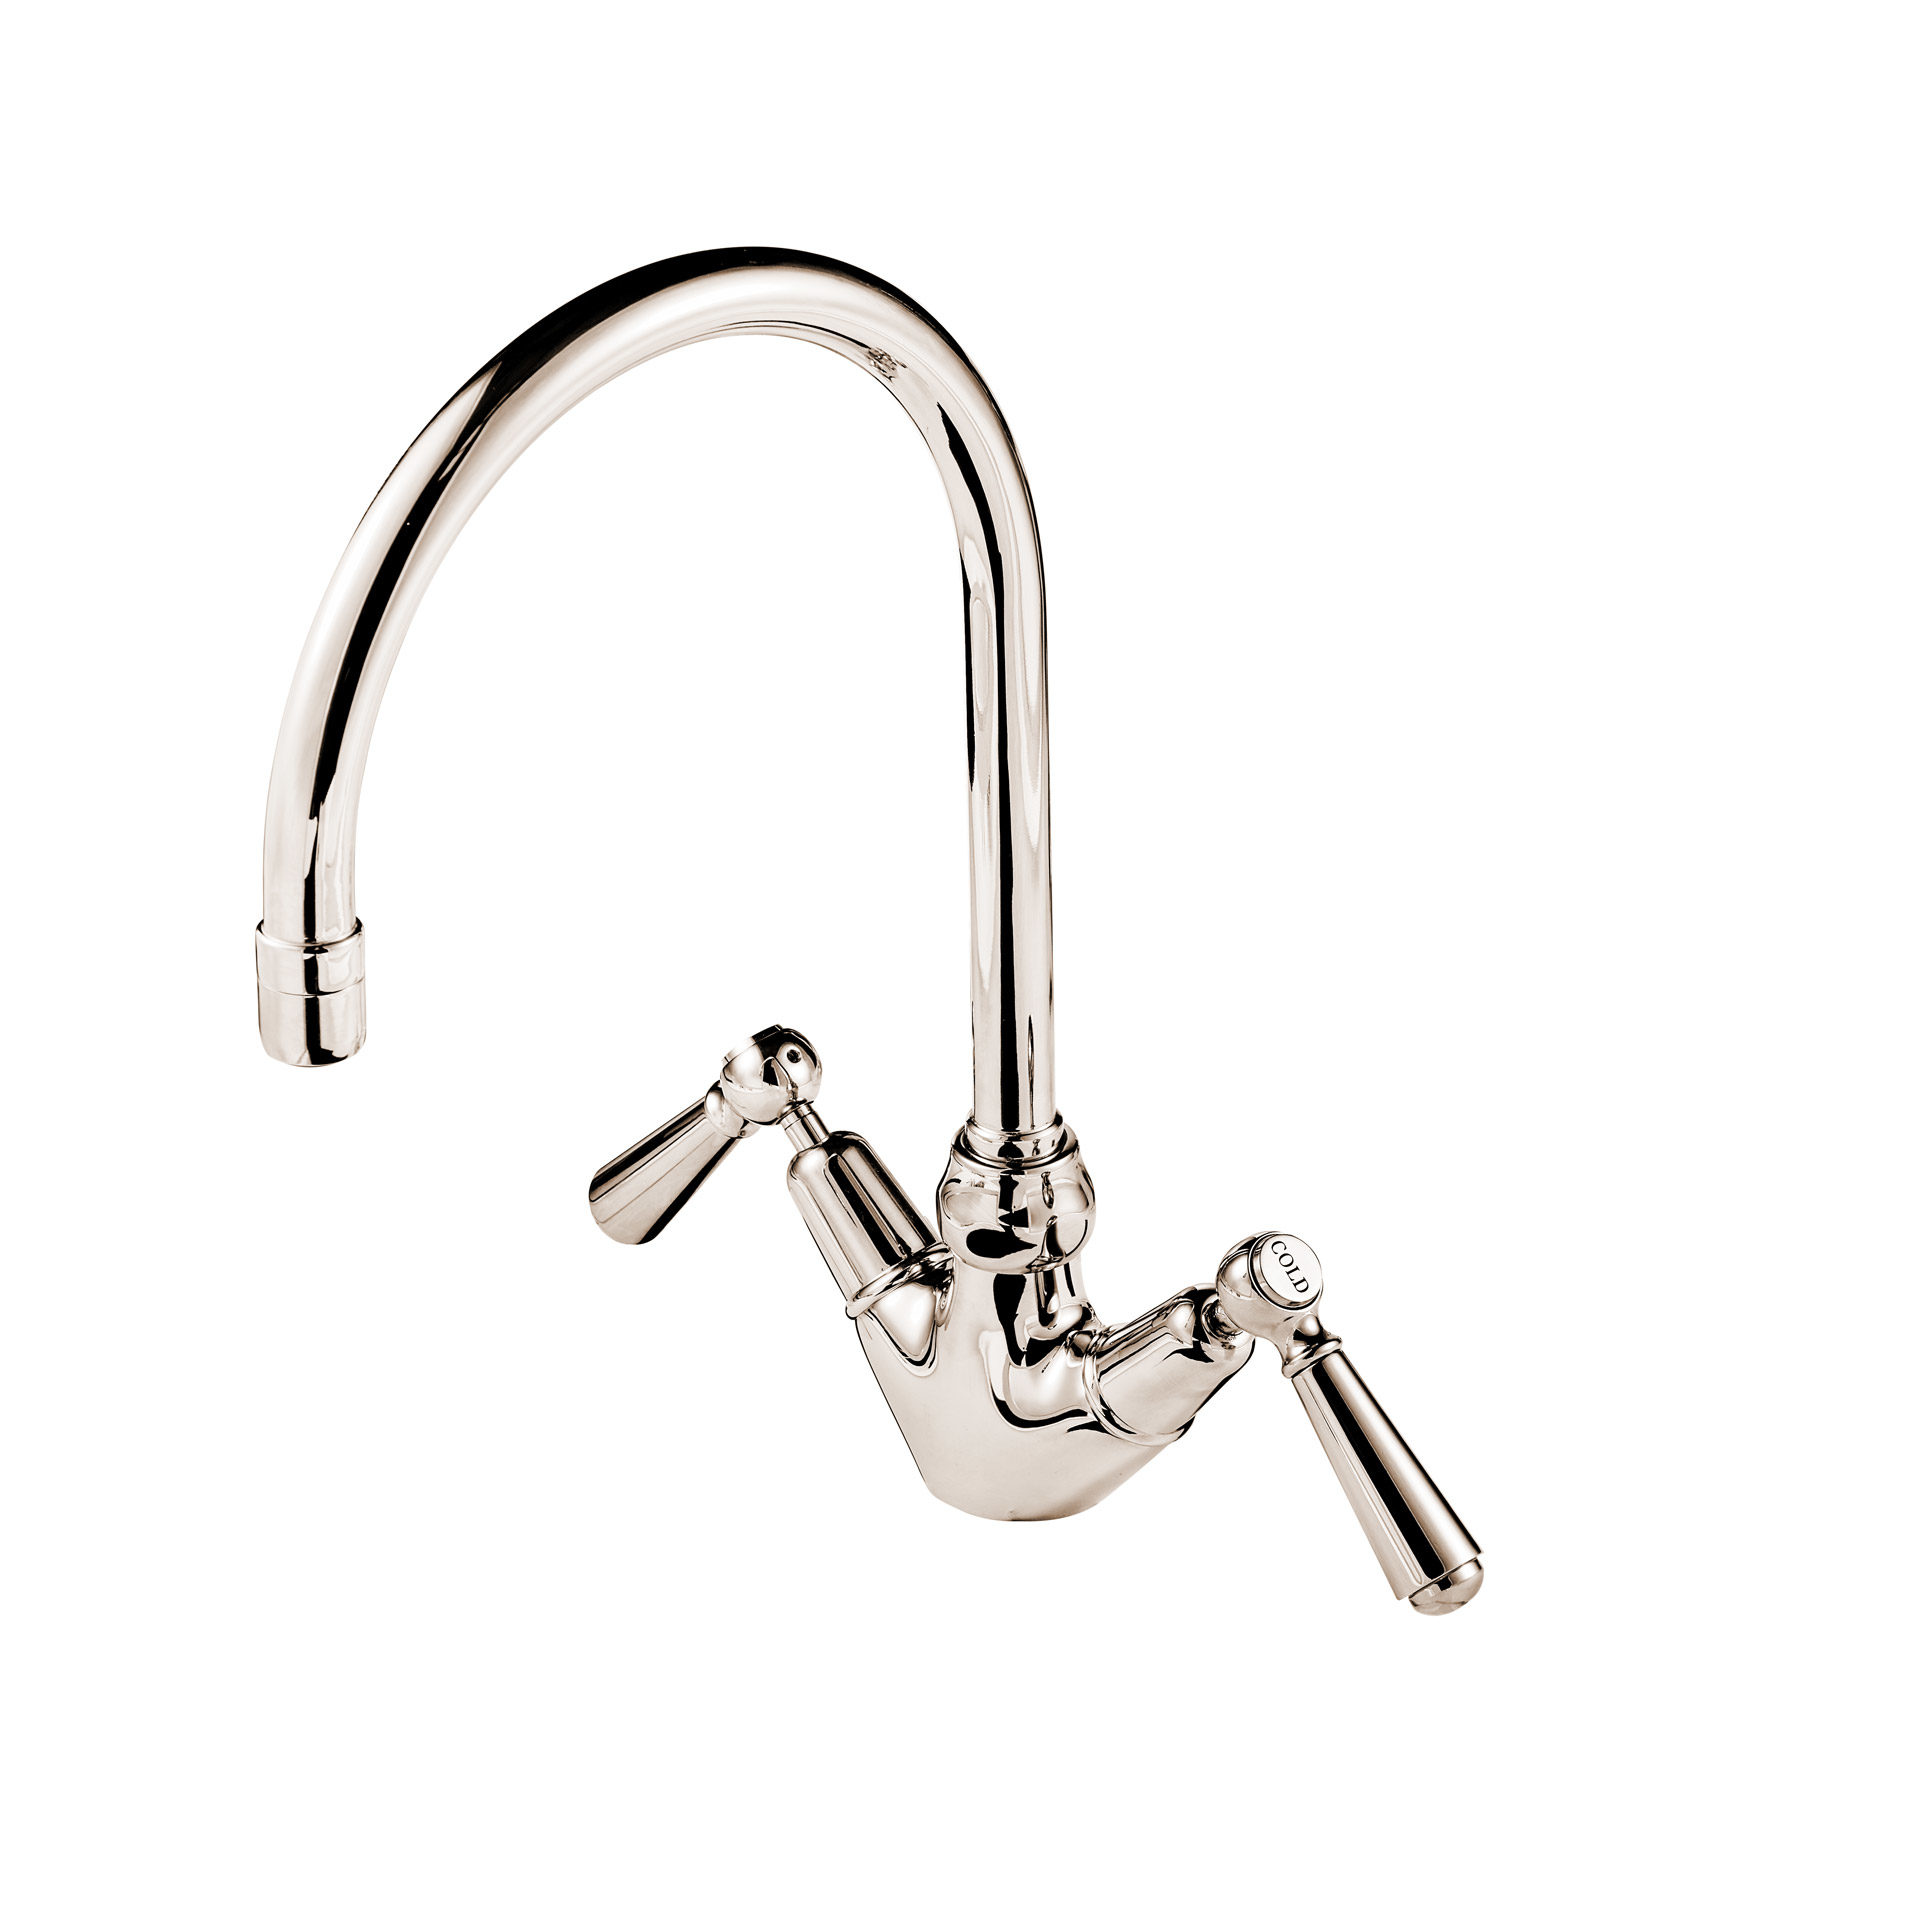 Deck mounted kitchen mixer taps with single hole and swivel swan neck